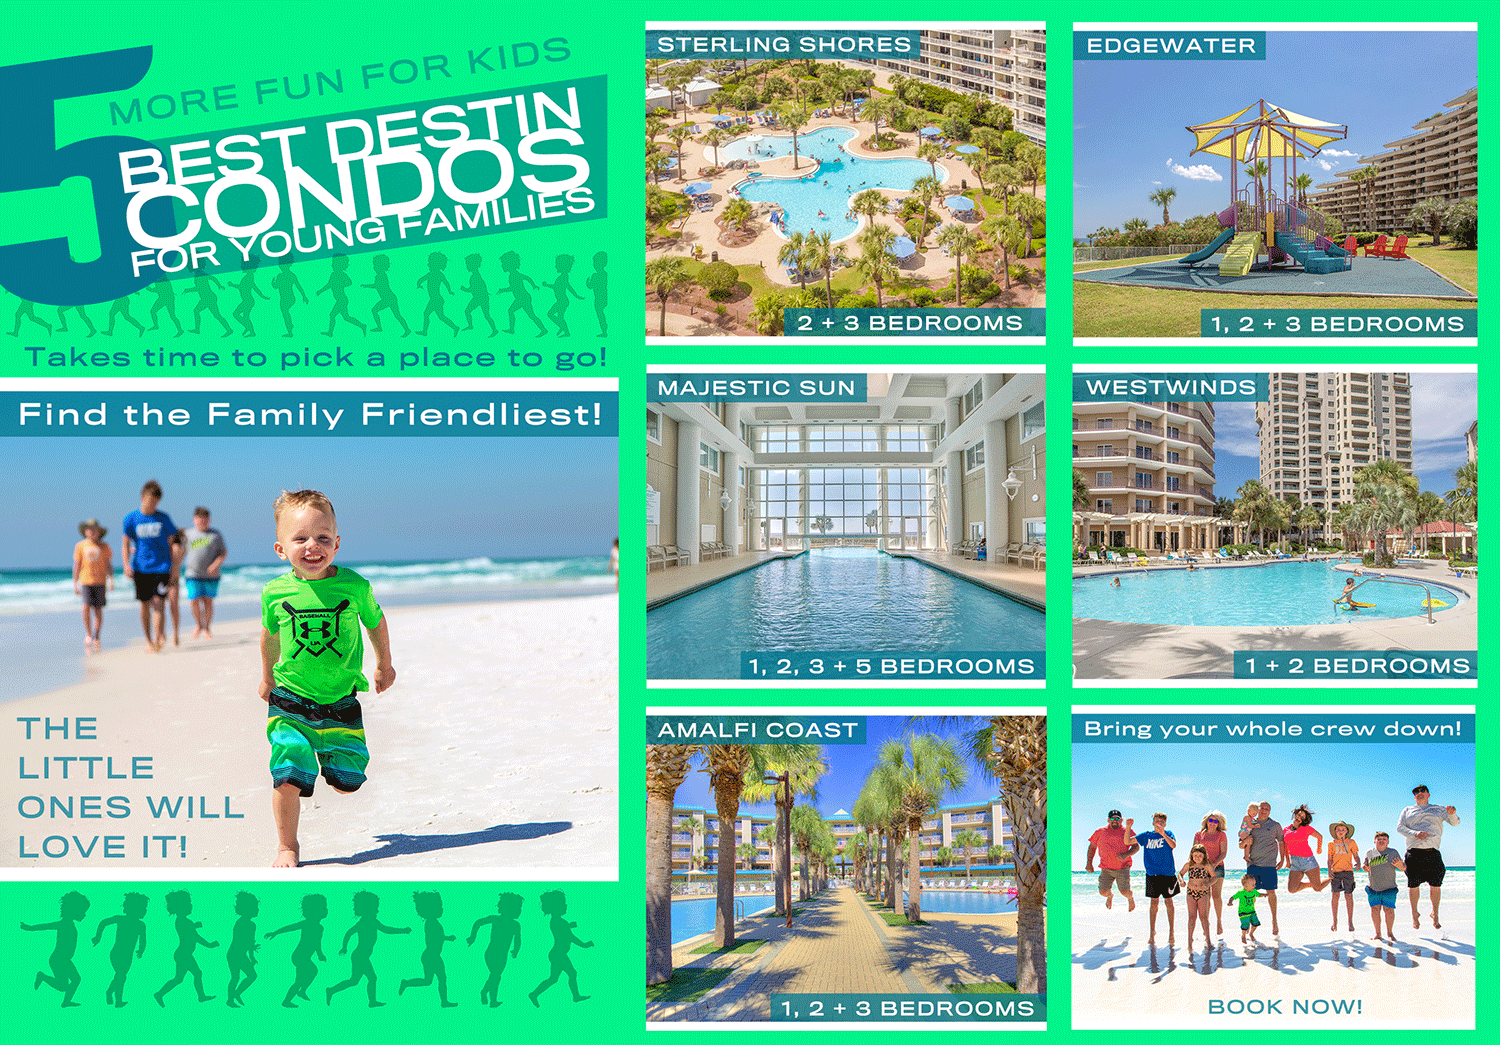 Best Destin Condos For Young Families